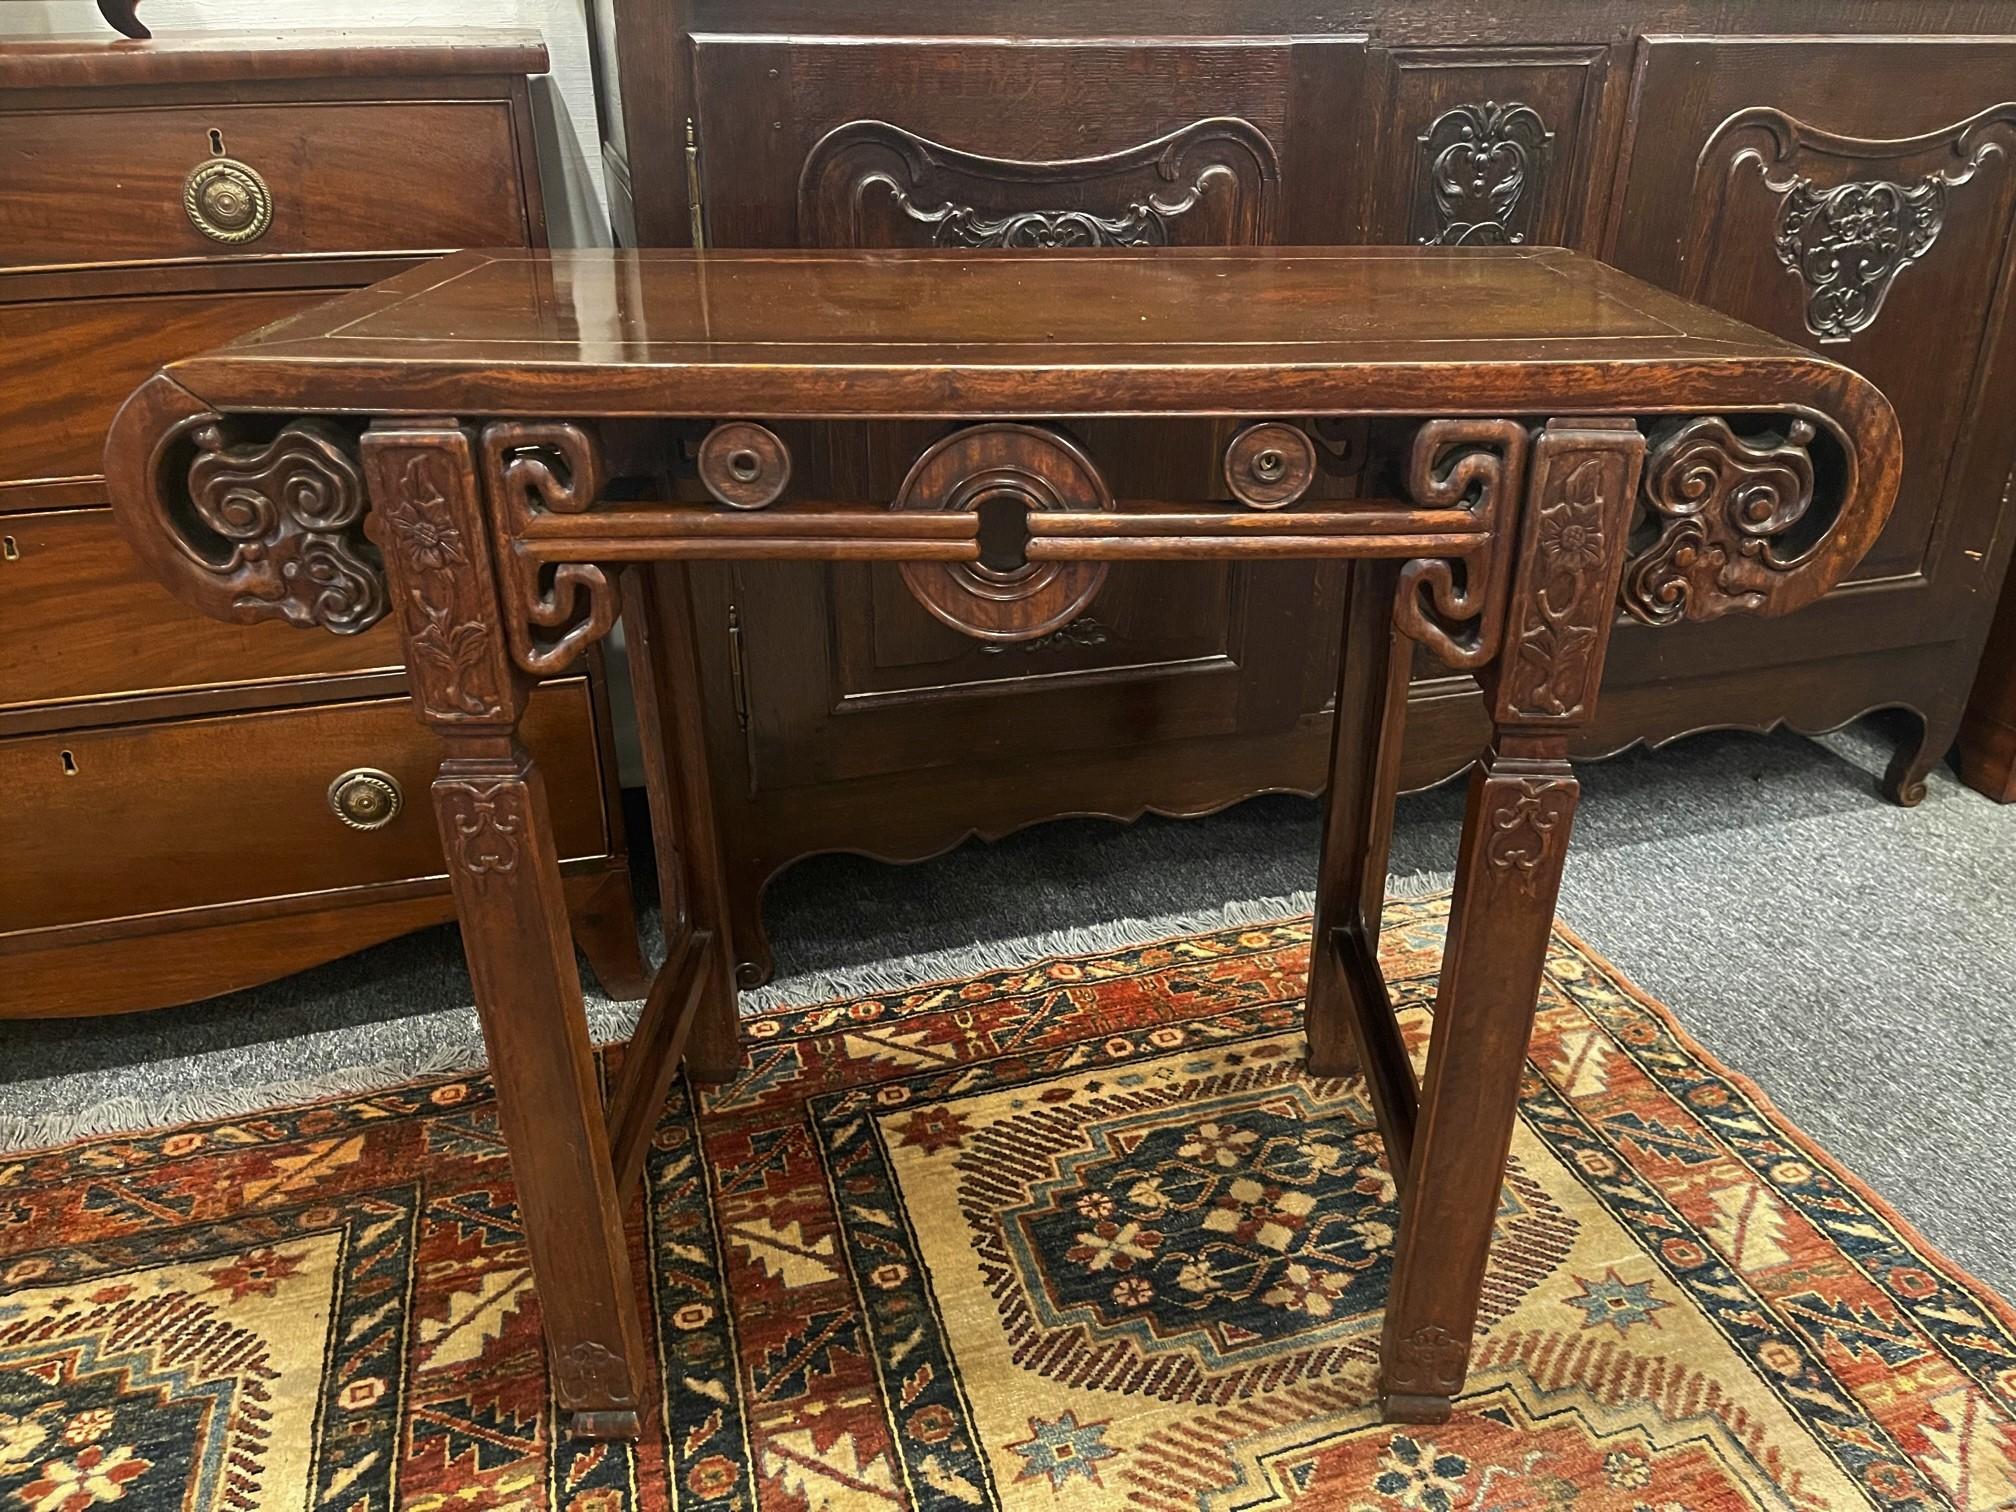 Mahogany Ming Chinese Altar Table, Early 20th Century For Sale 2